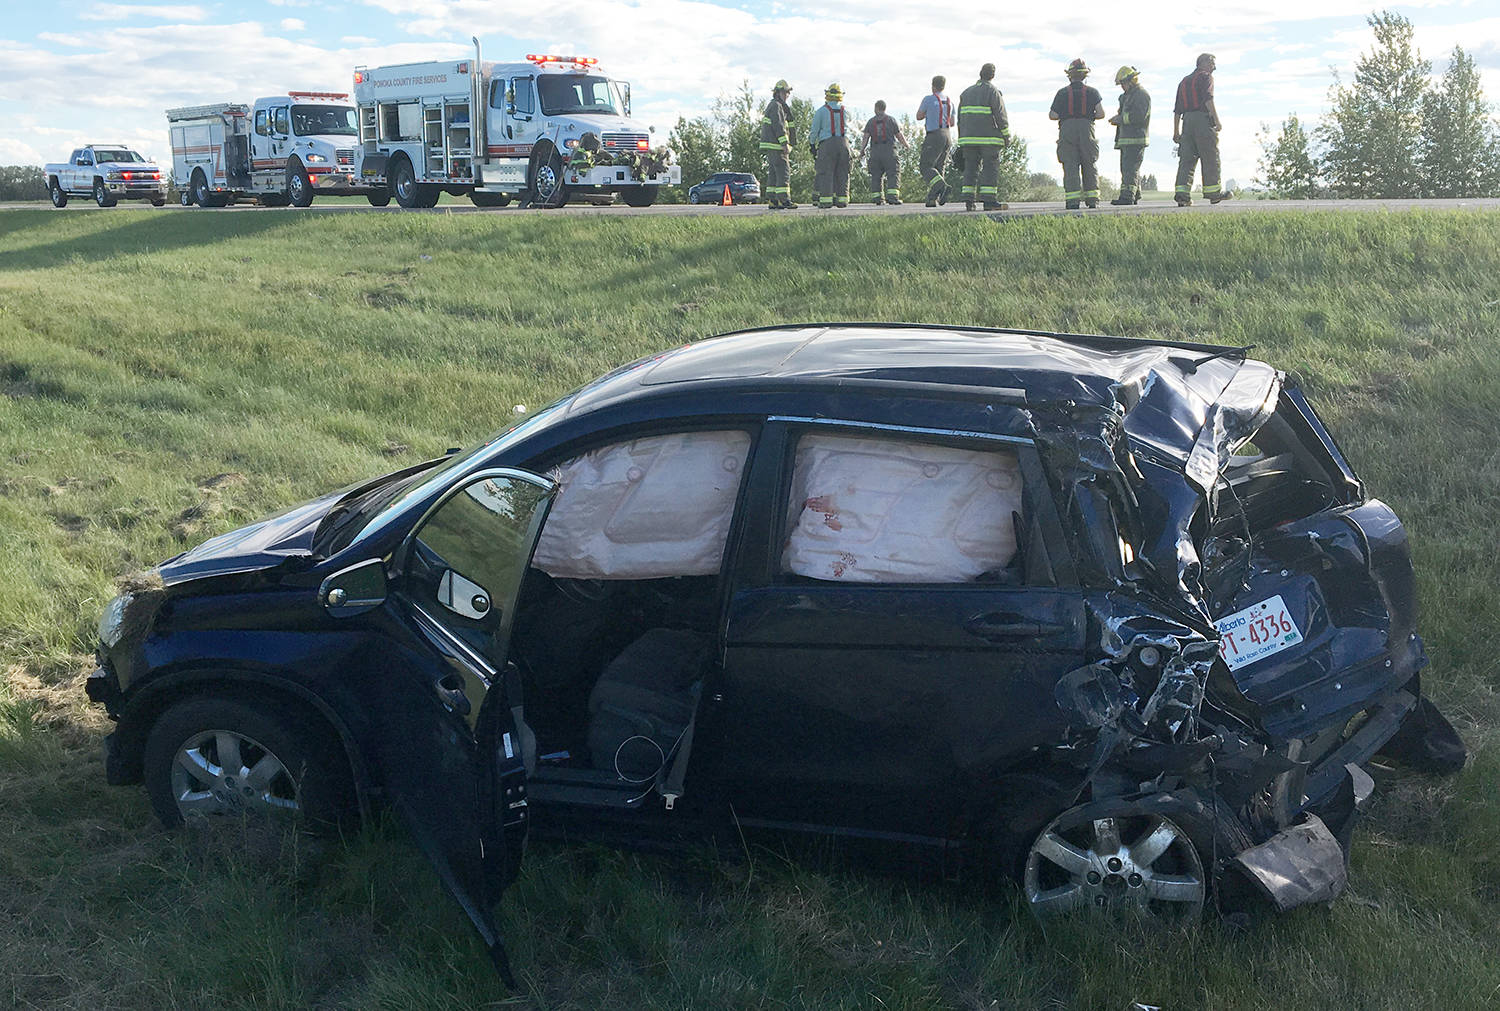 The air bags on this Honda crossover deployed after being hit by a semi tractor Saturday late afternoon. The incident is believed to have occurred after two sedans stopped abruptly on Highway 2.